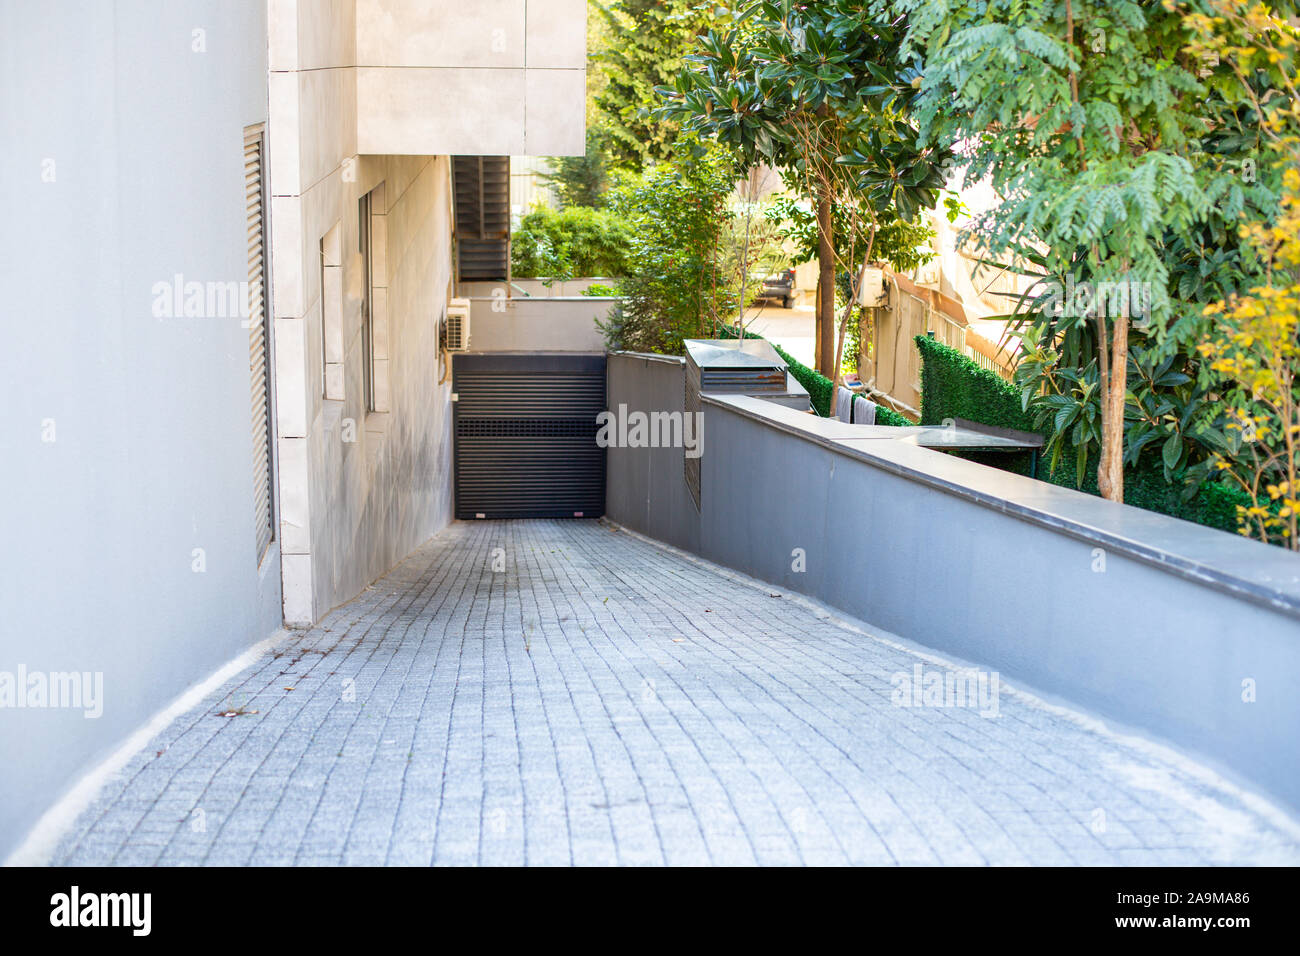 Steep paving descent to the parking lot. Automatic shutter Rolling gates. Residential complex with lots of greenery. Stock Photo